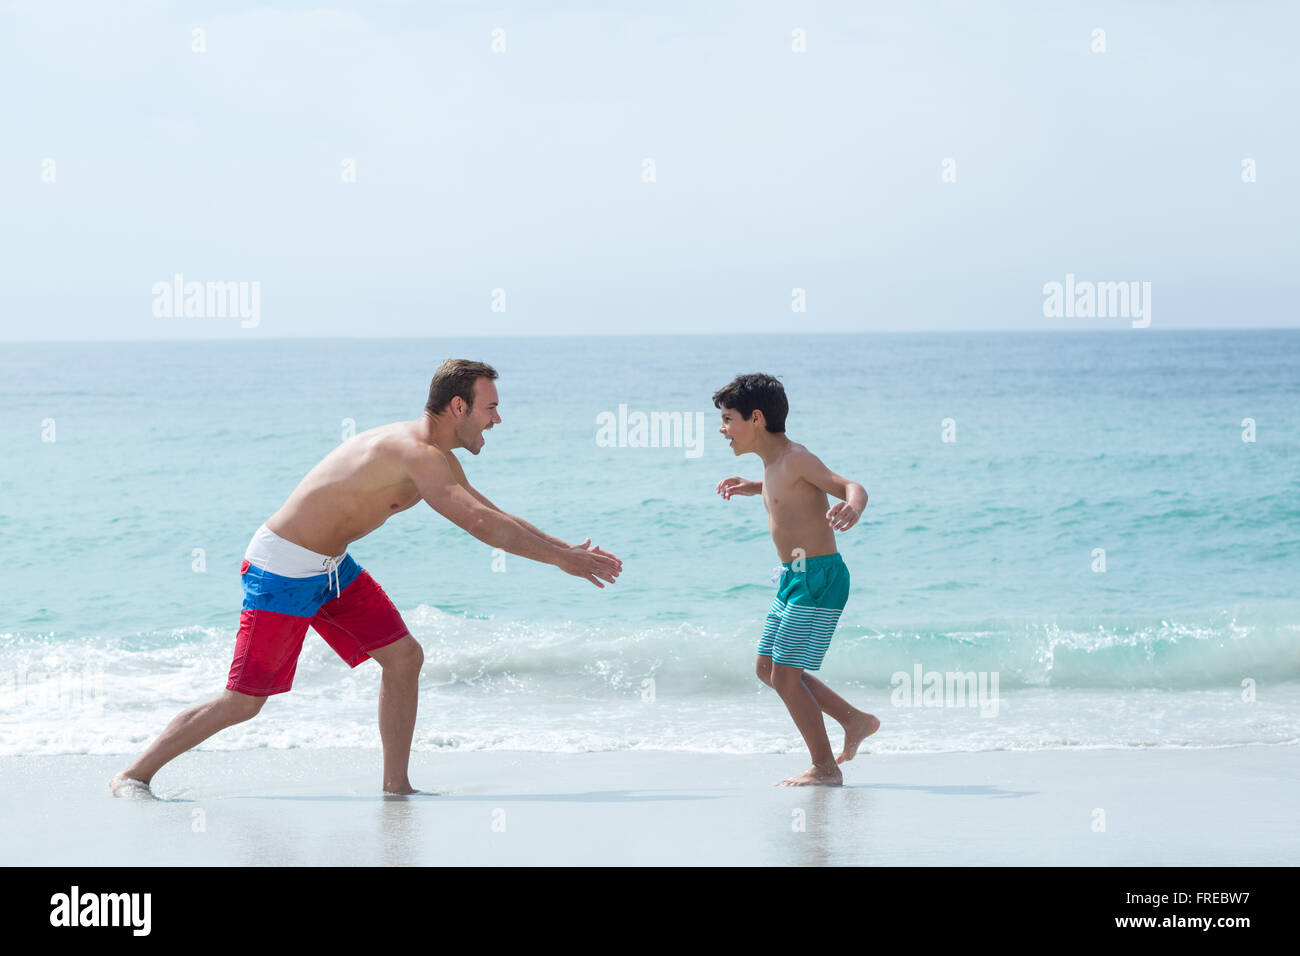 Father chasing son at beach Stock Photo